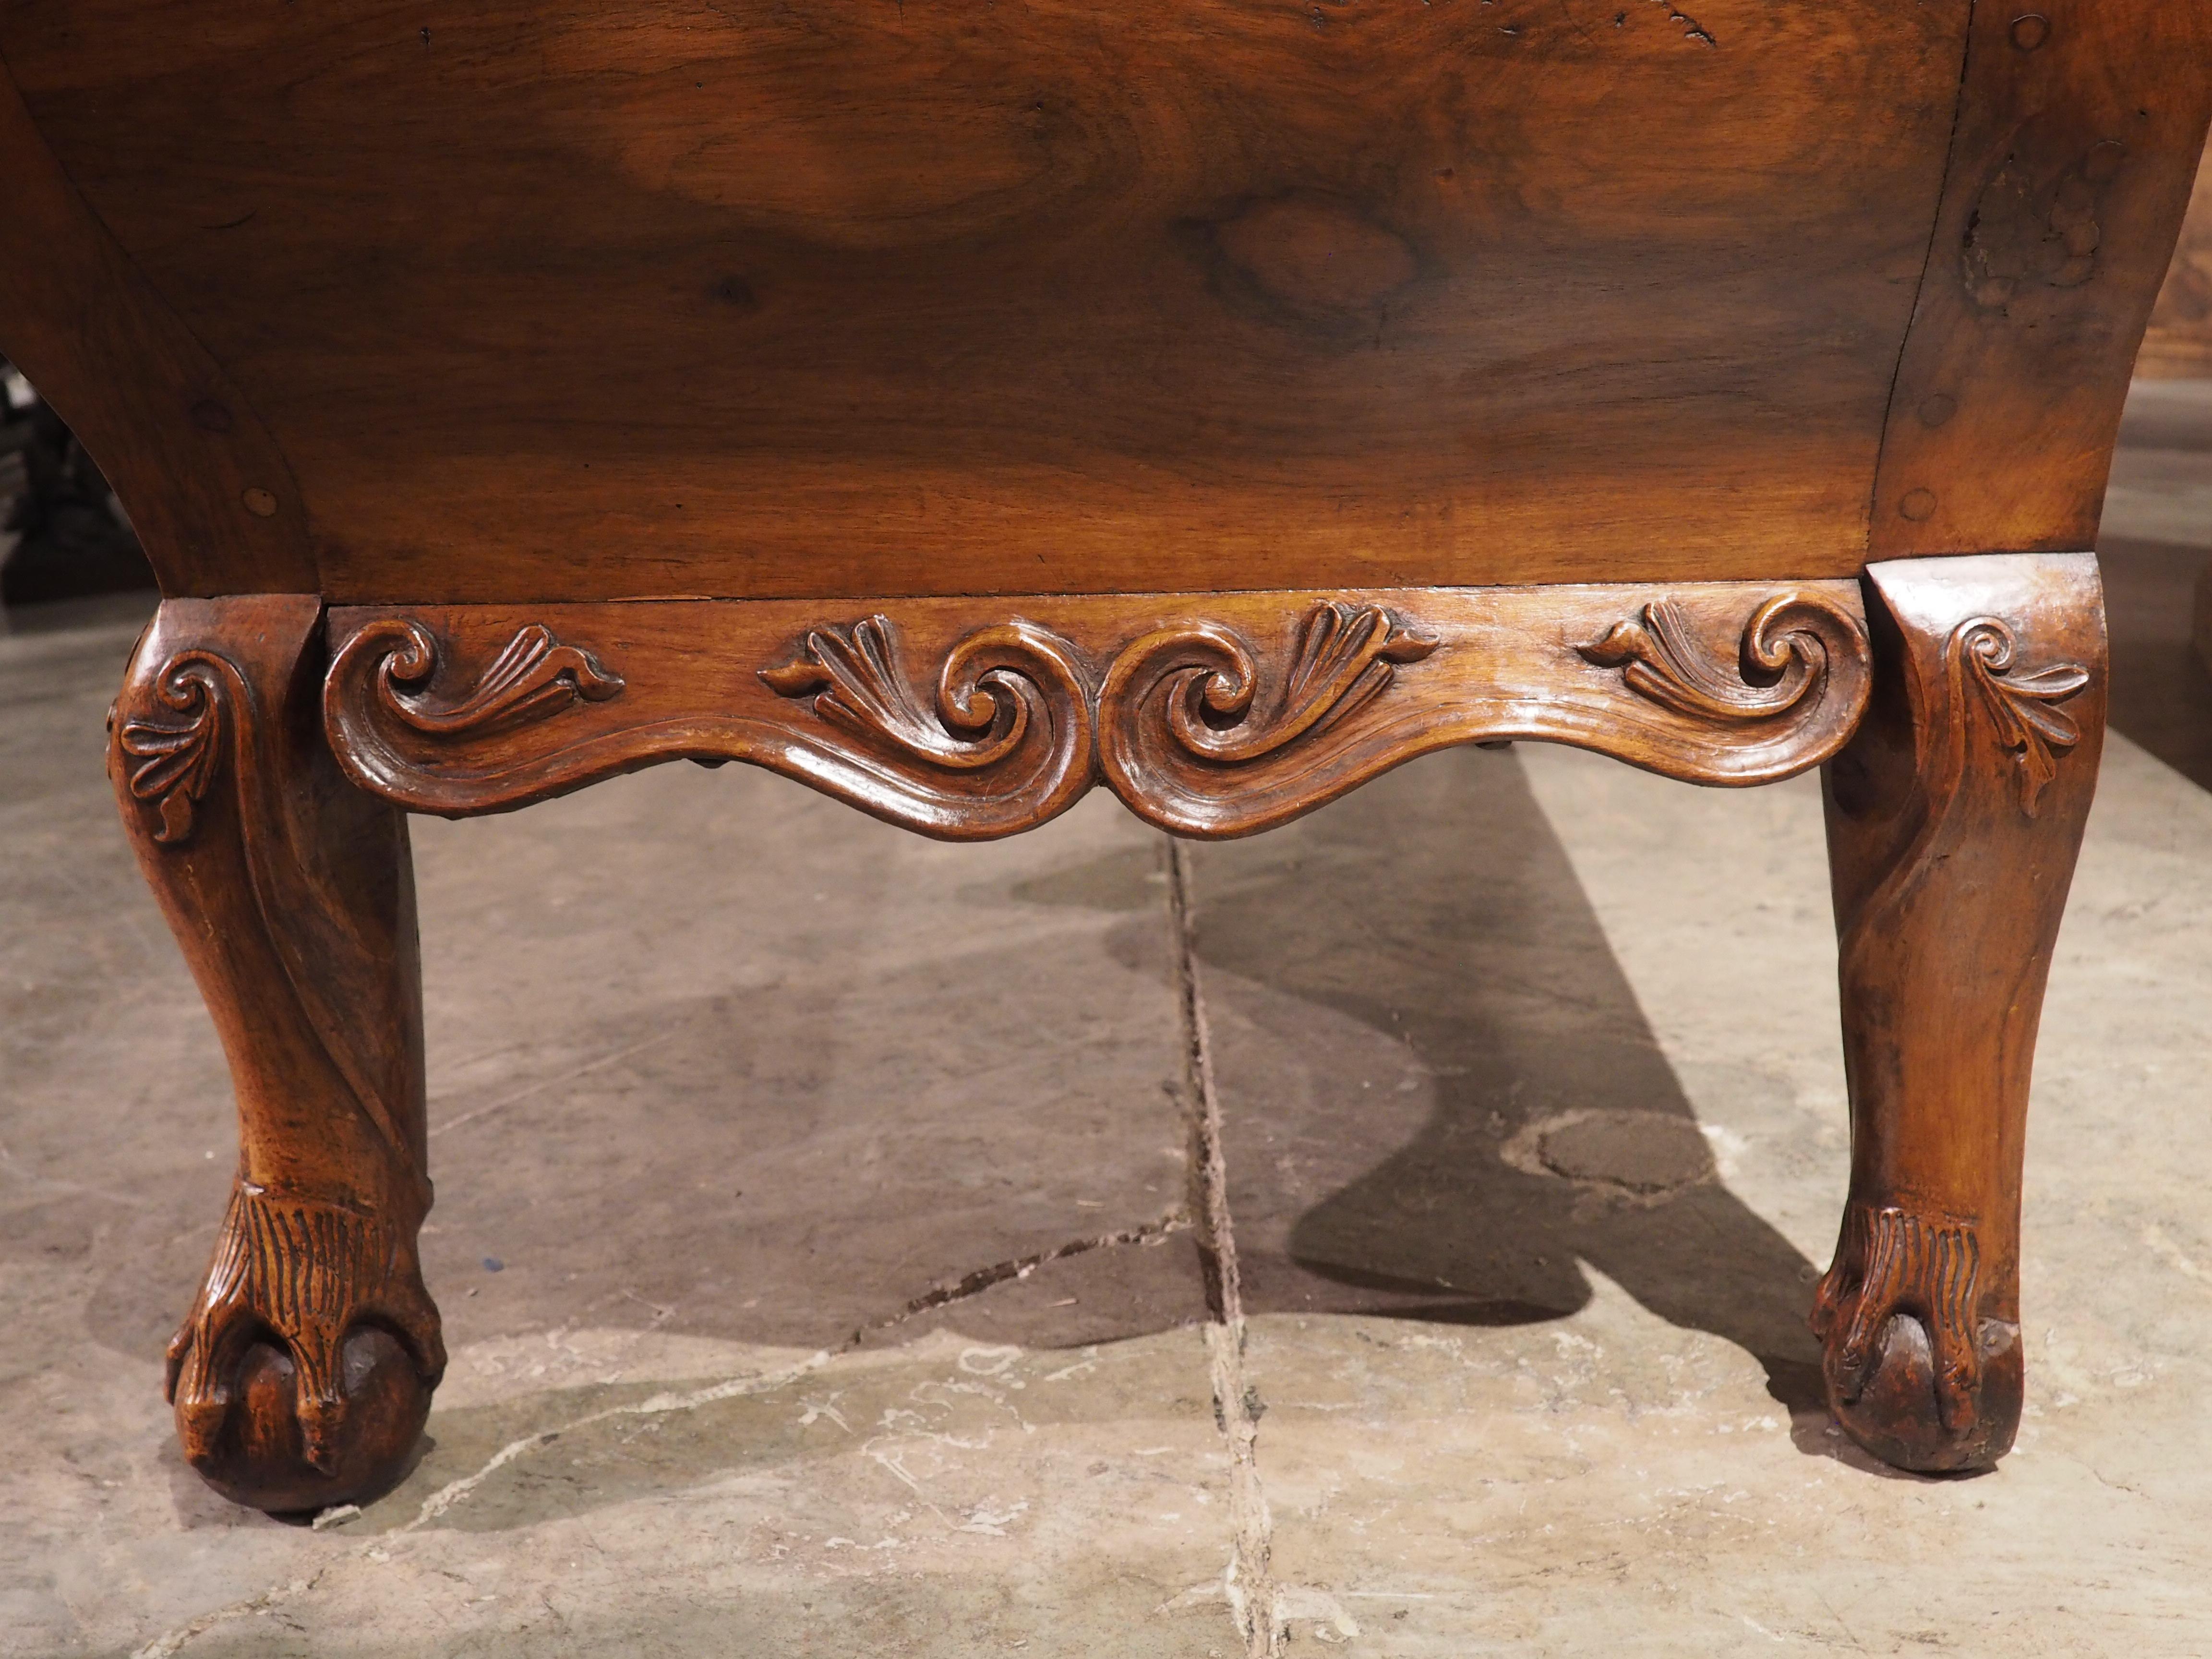 Rare 18th Century French Walnut Commode “Angouleme” with Stamped Bronze Hardware For Sale 3